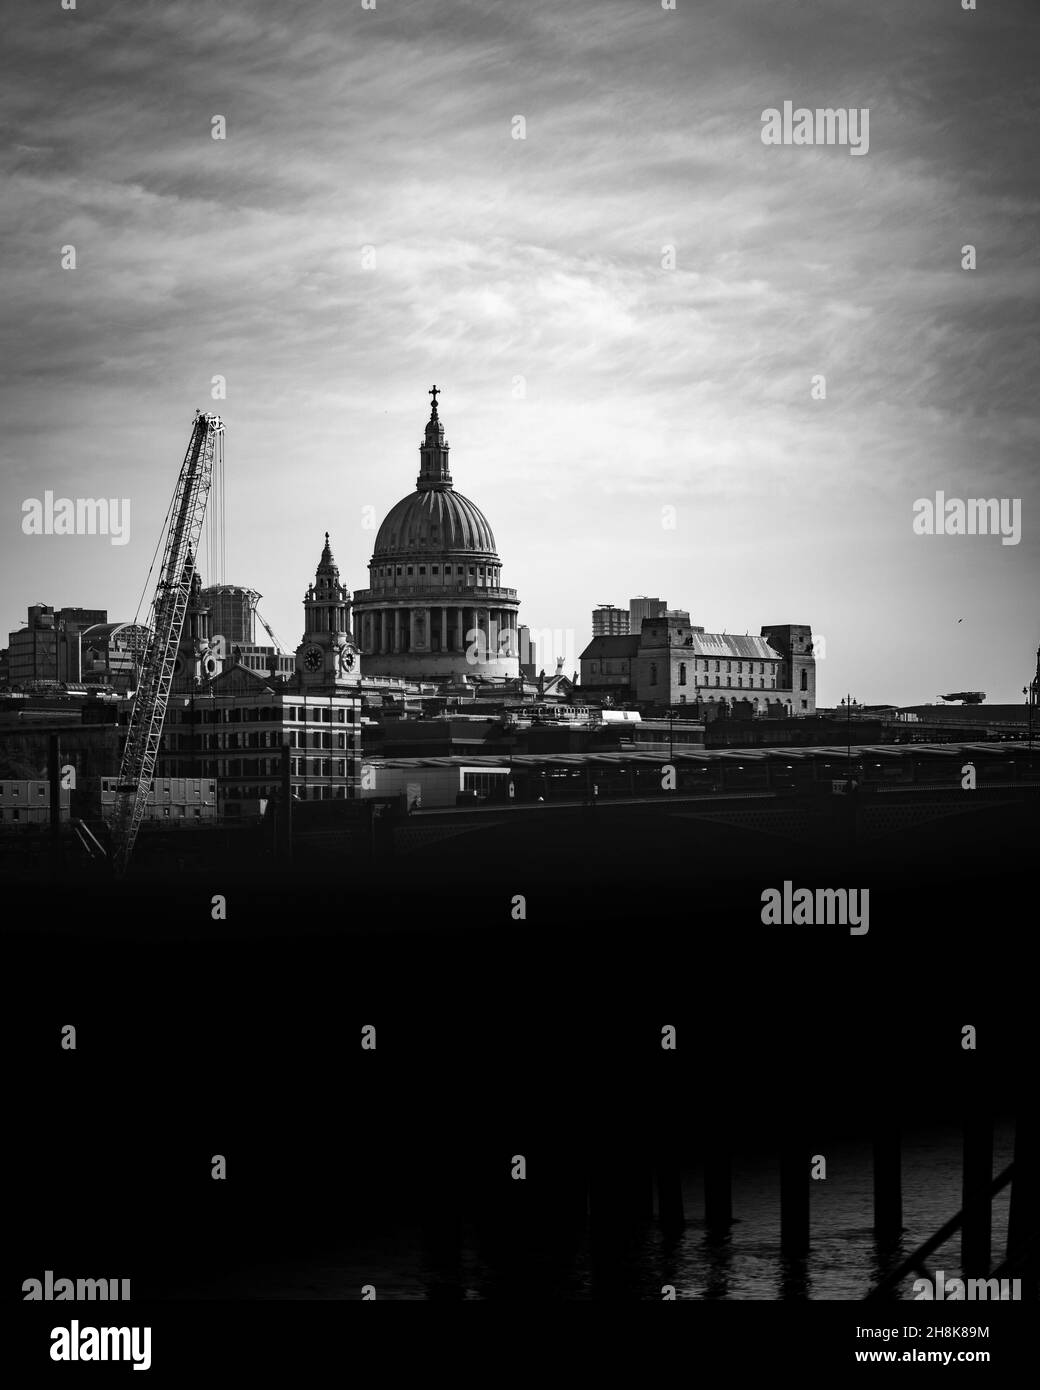 Grayscale view of st paul cathedral, London, united kingdom against a light cloudy sky Stock Photo